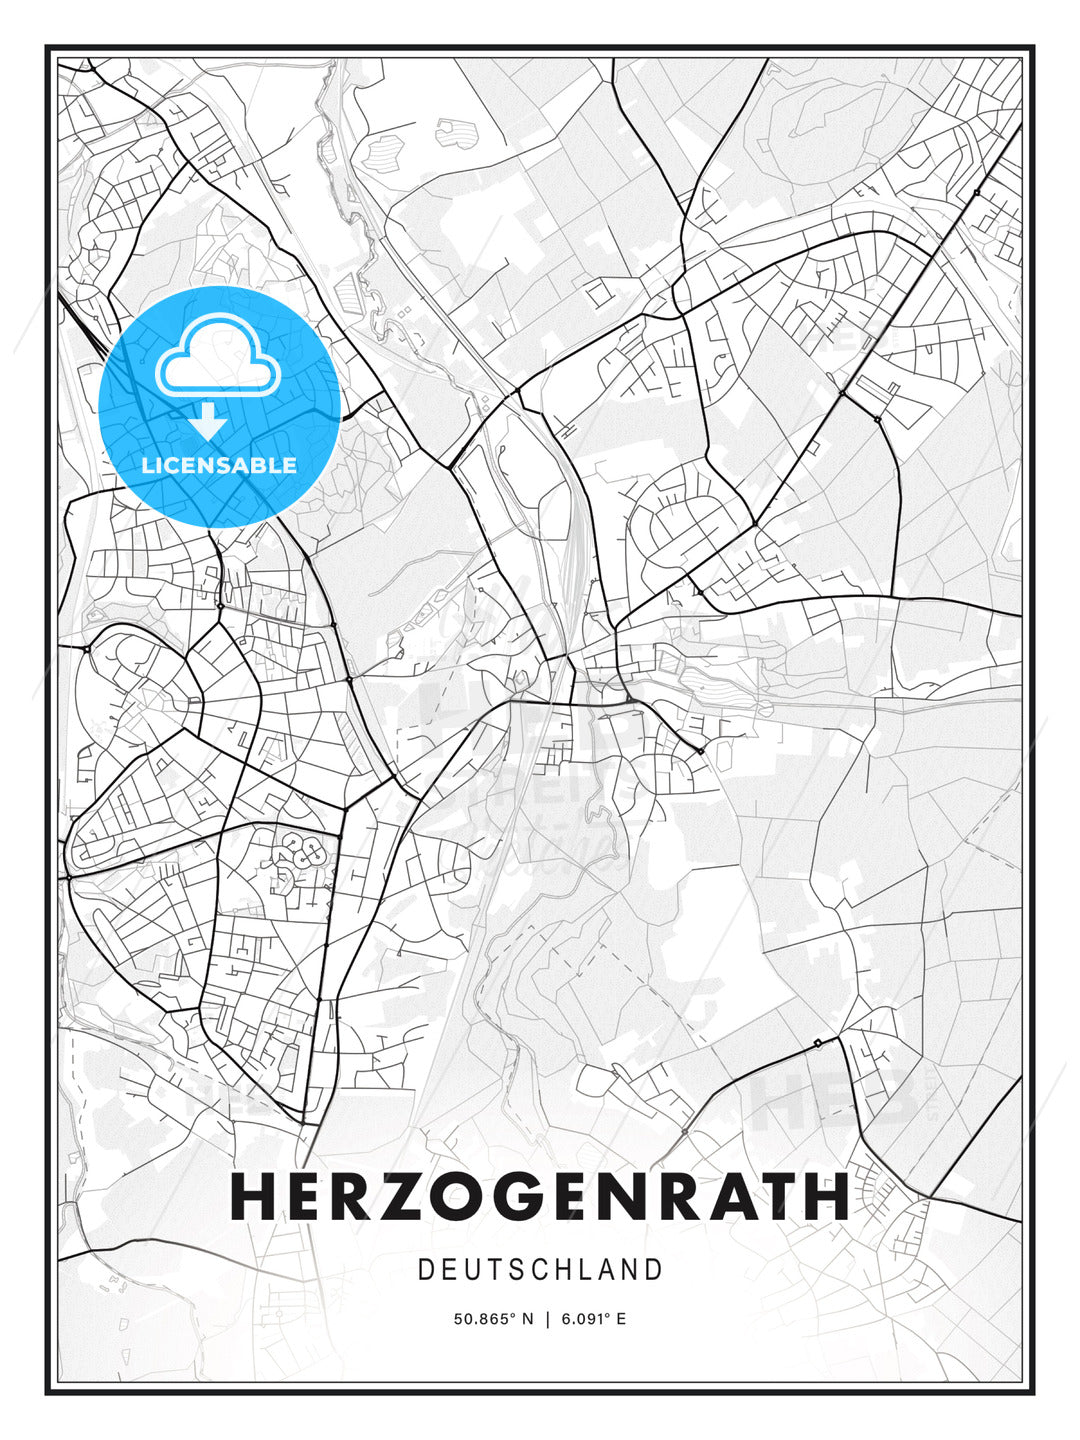 Herzogenrath, Germany, Modern Print Template in Various Formats - HEBSTREITS Sketches